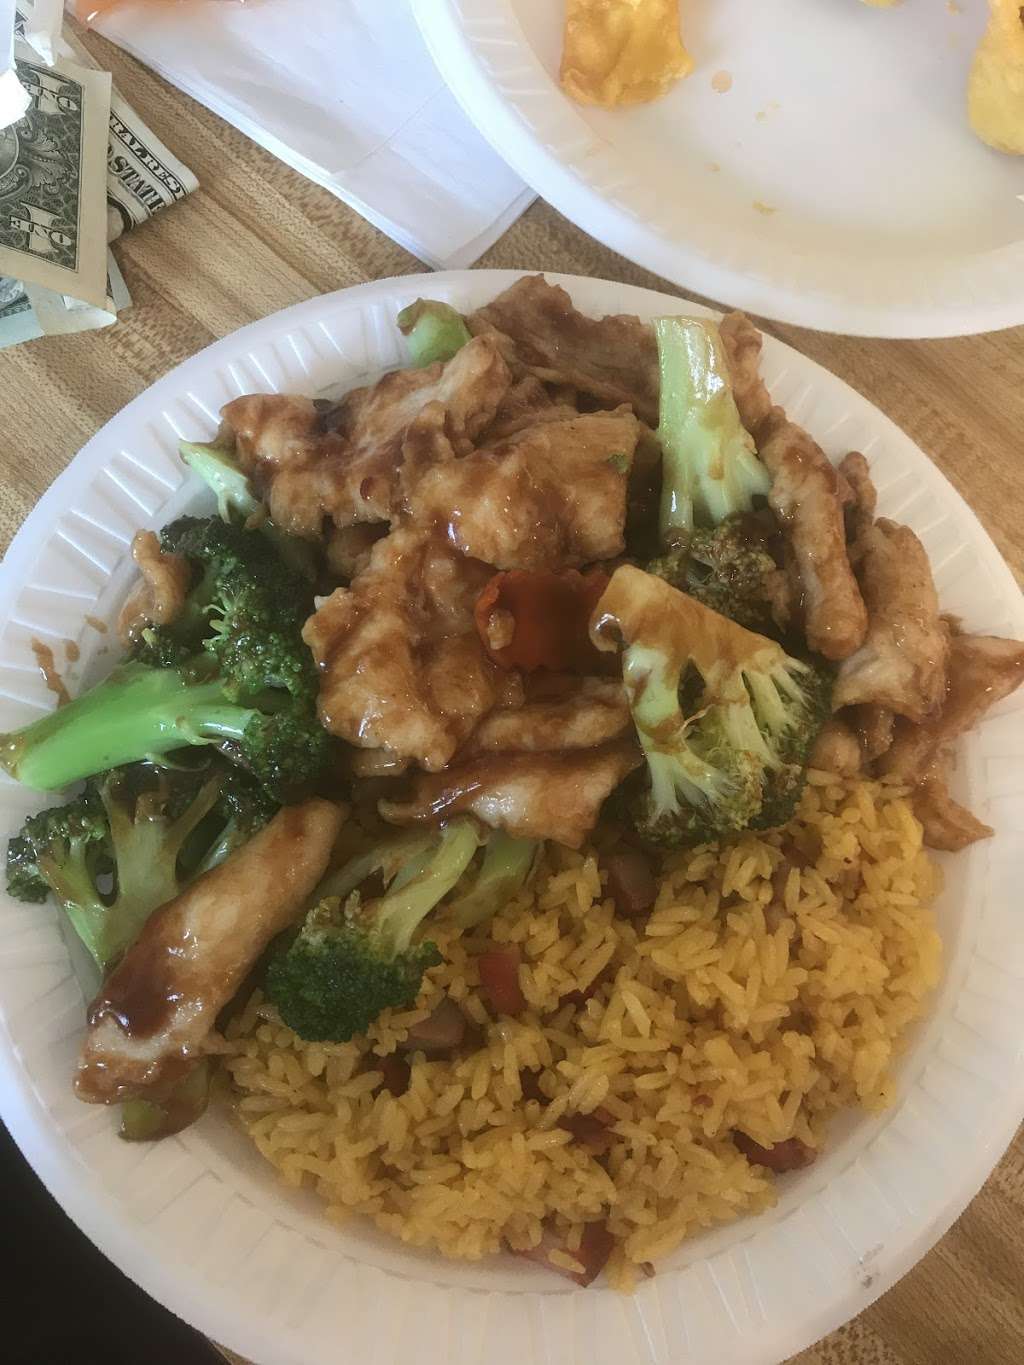 L & T Chinese Kitchen | 600 Tuckahoe Rd, Yonkers, NY 10710, USA | Phone: (914) 337-8999